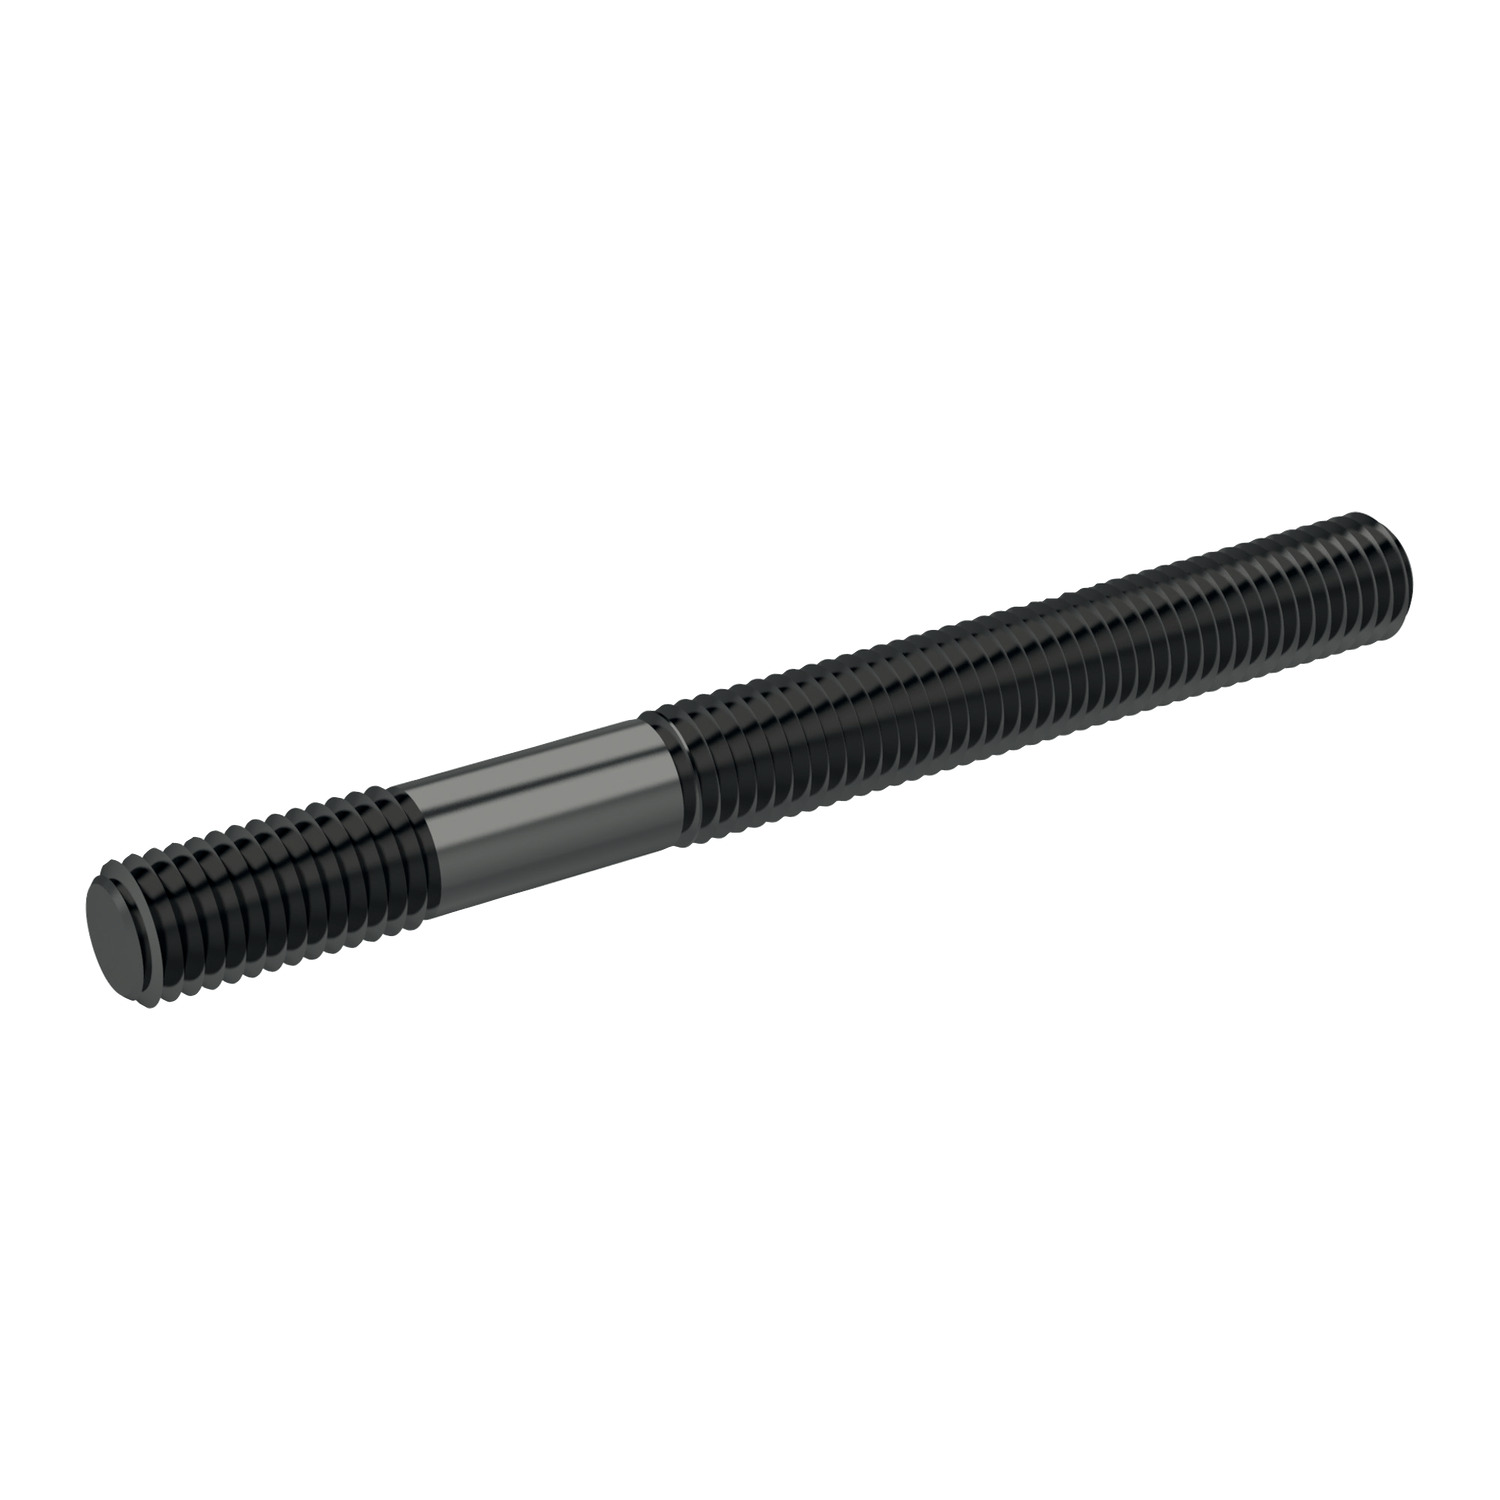 Studs Longer length Studs than DIN 6379 which are available in strength class 8,8. Longer thread length provides added security when high forces are used.